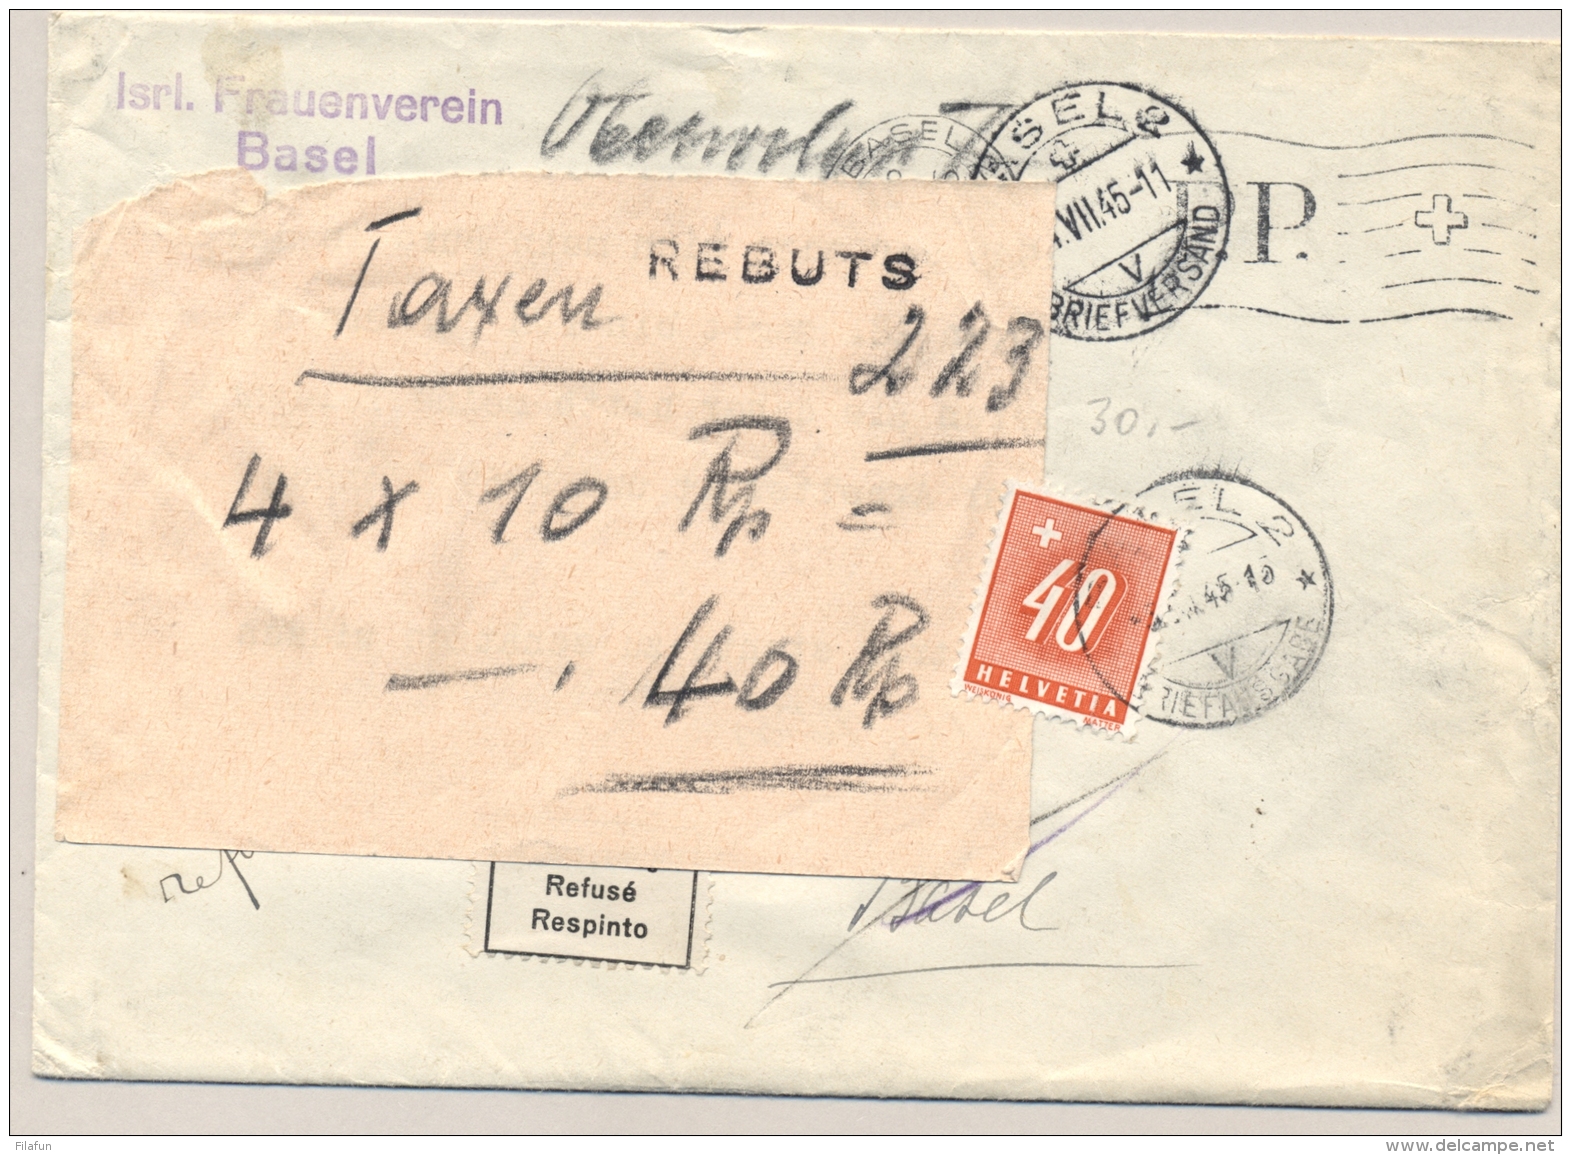 Schweiz - 1945 - 40 Rp Taxed And Rejected PP-cover Basel Isrl. Frauenverein - Strafportzegels